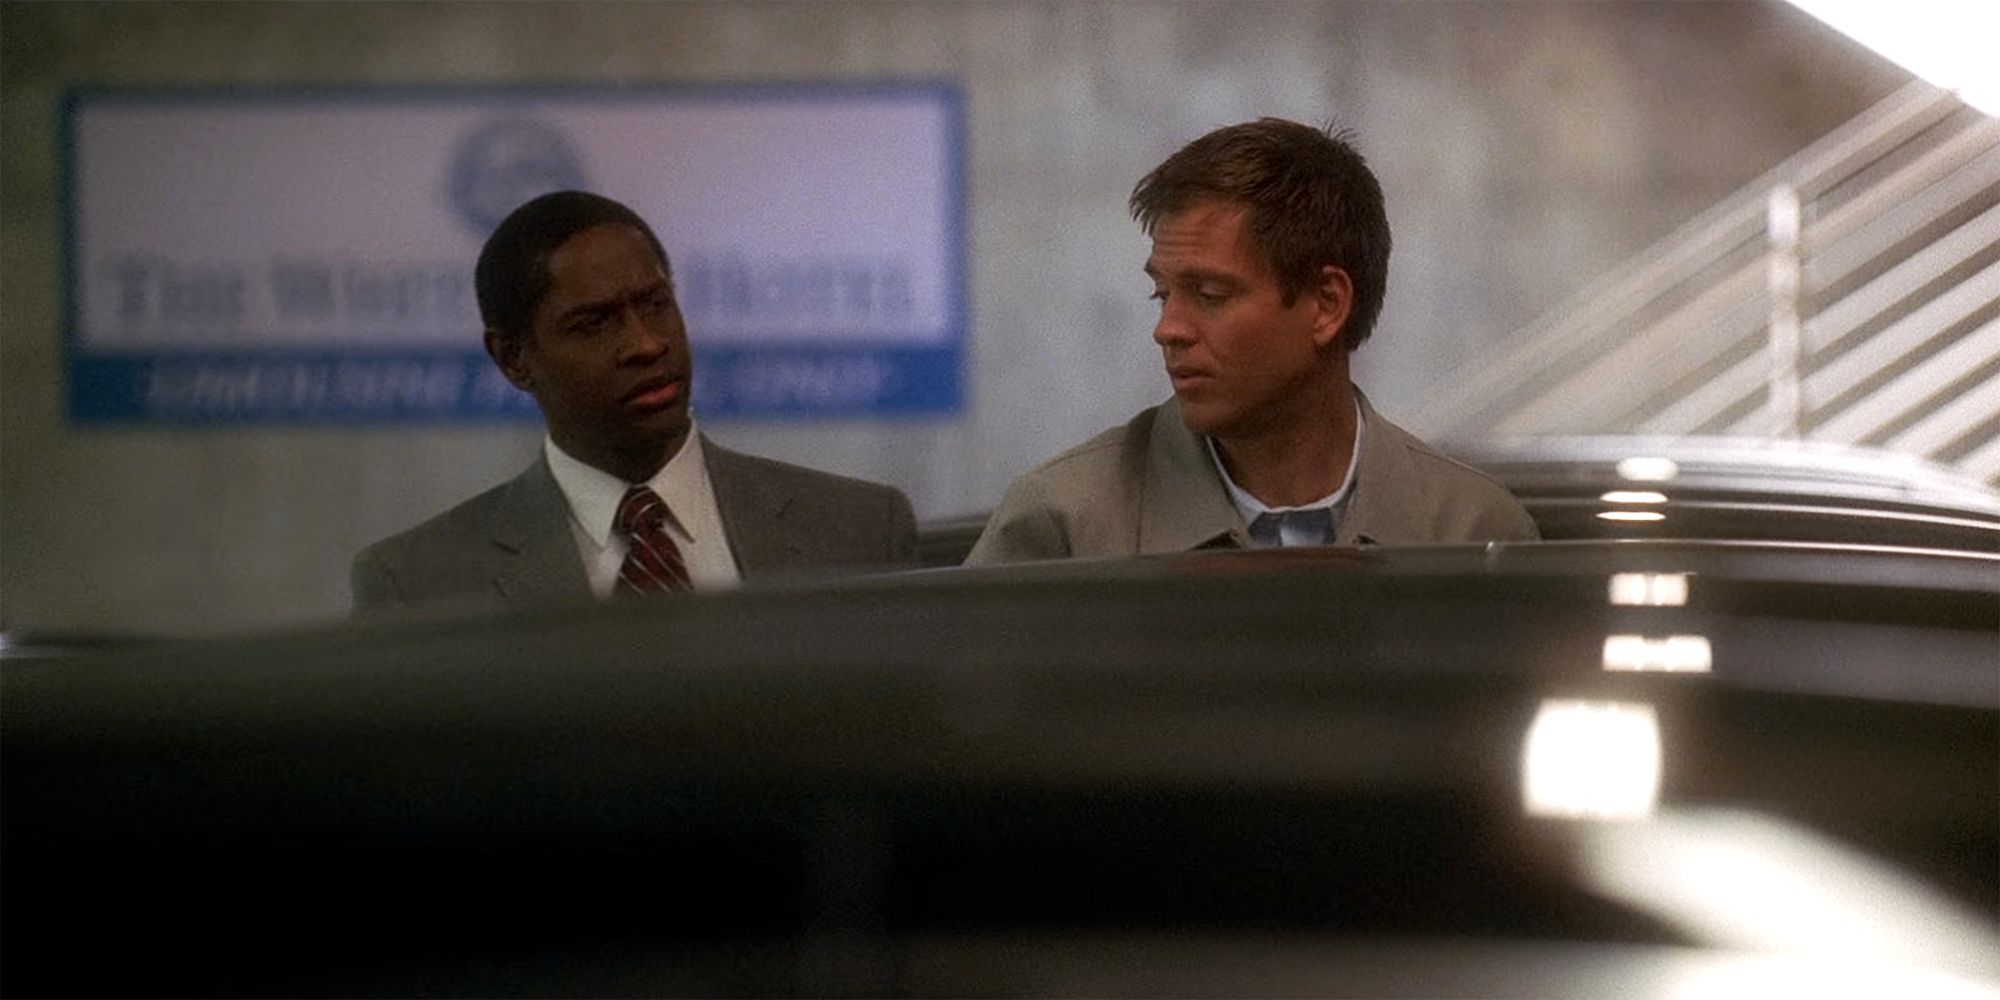 Tim Russ and Michael Weatherly in NCIS